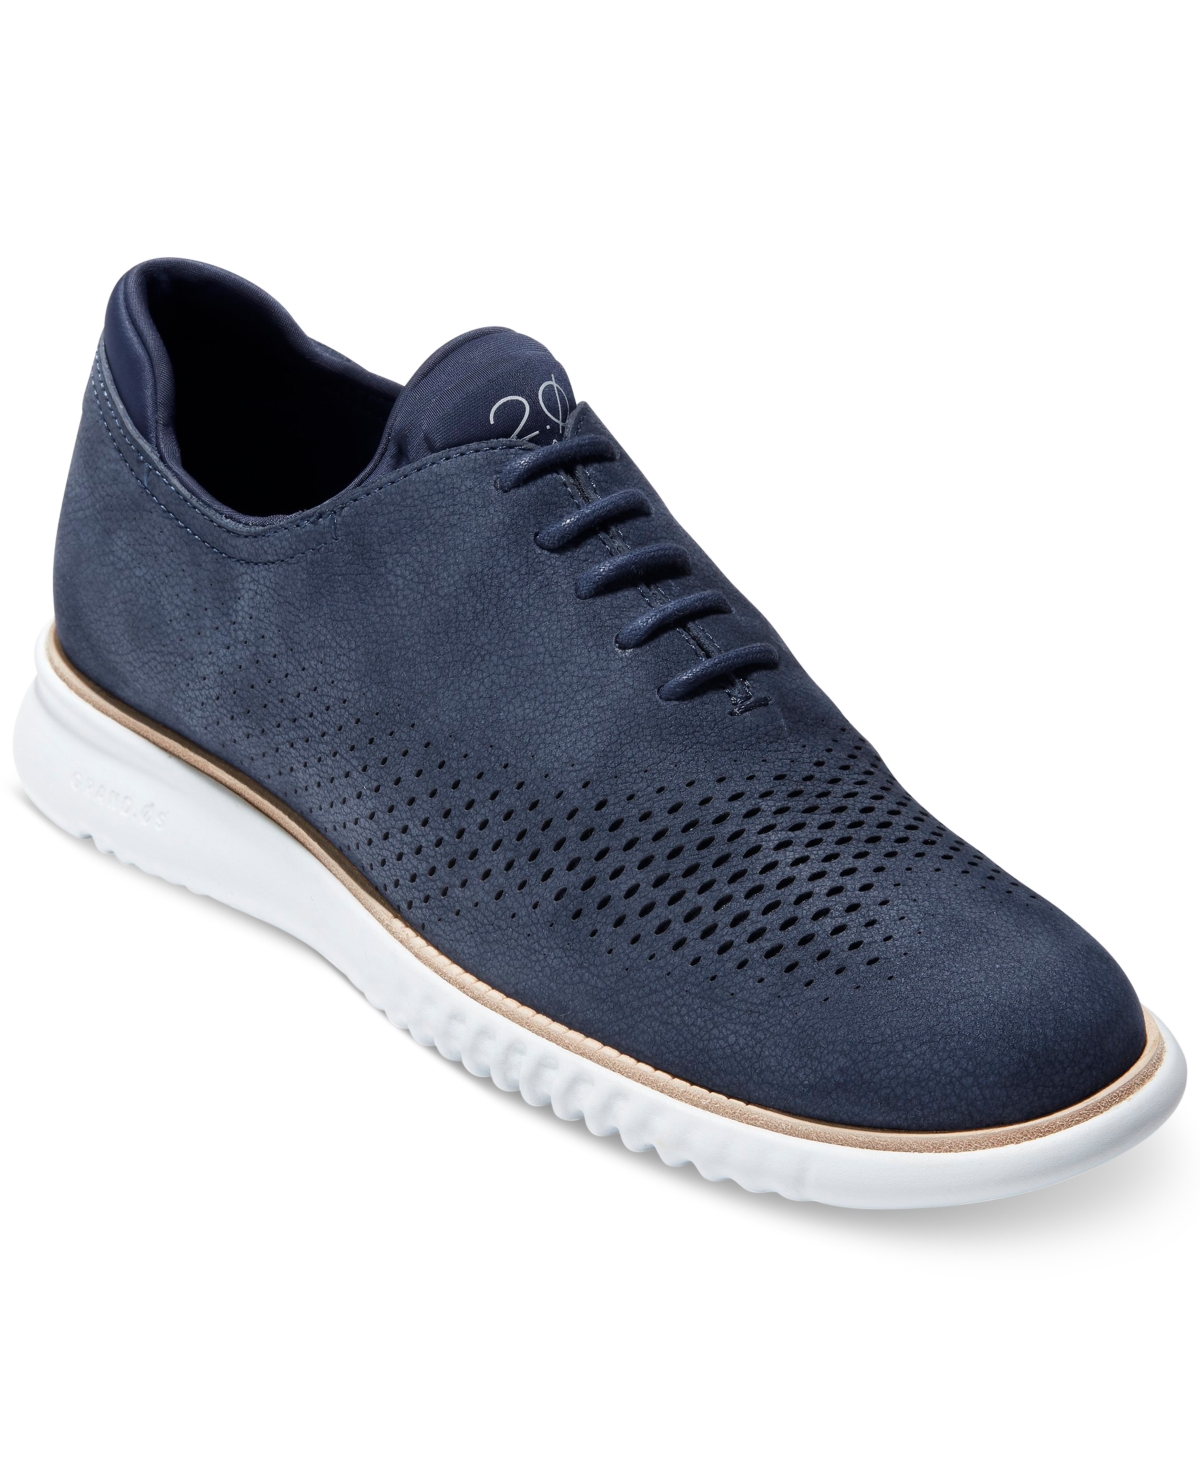 Cole Haan Men's 2.zerogrand Laser Wing Oxford Shoes In Marine Blue,optic White